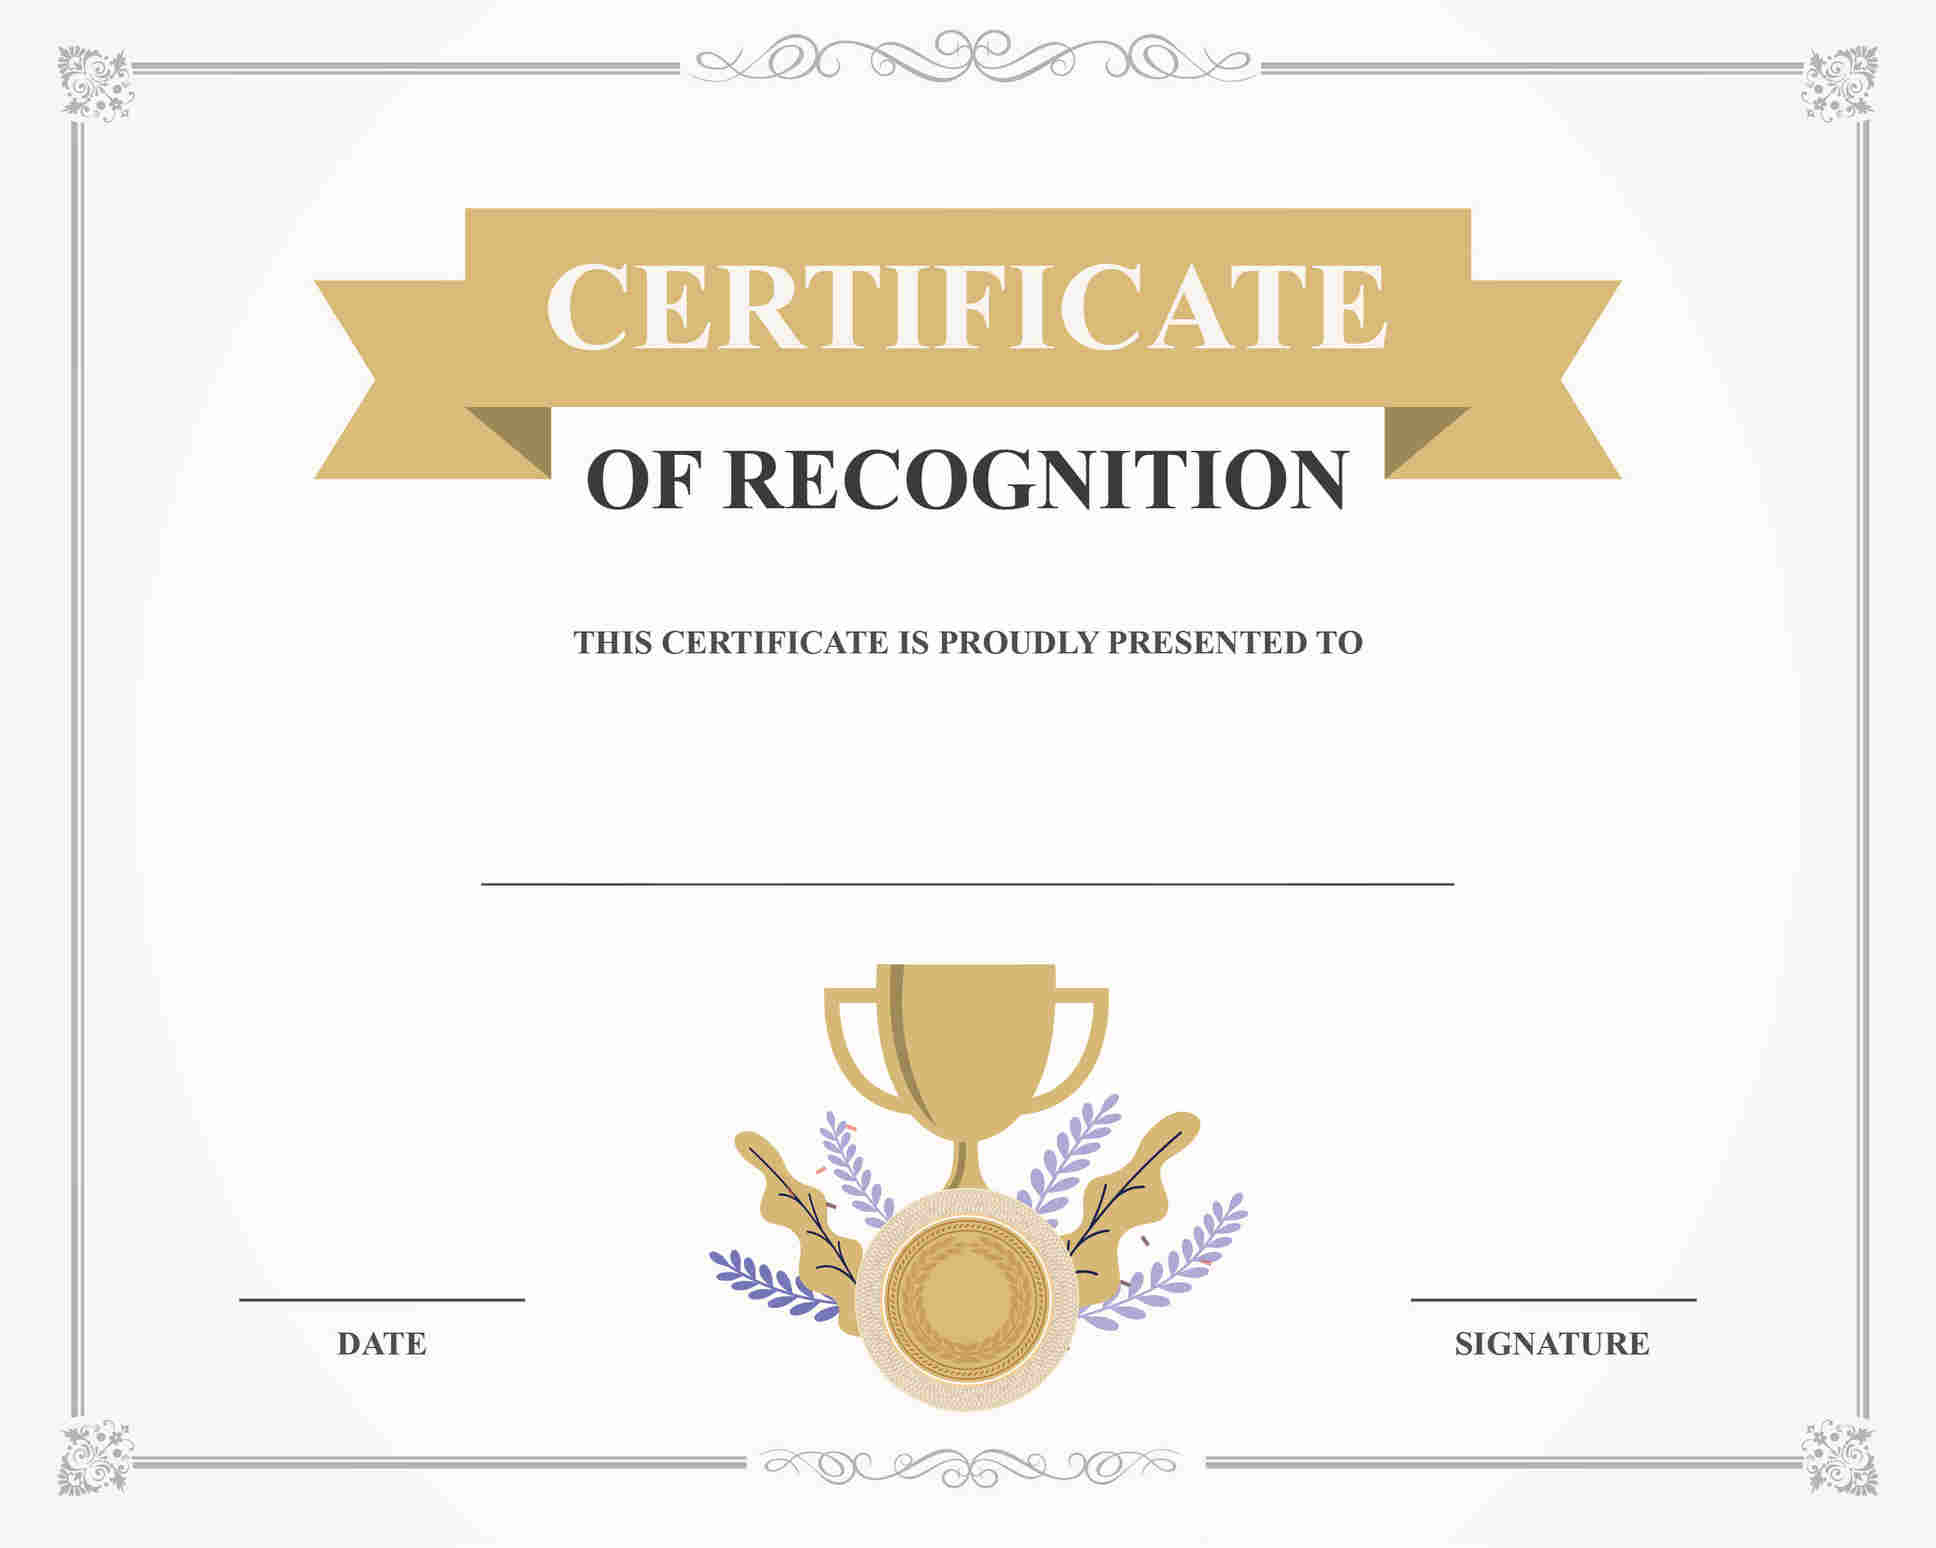 10 Amazing Award Certificate Templates In 2021 - Recognize throughout Template For Recognition Certificate